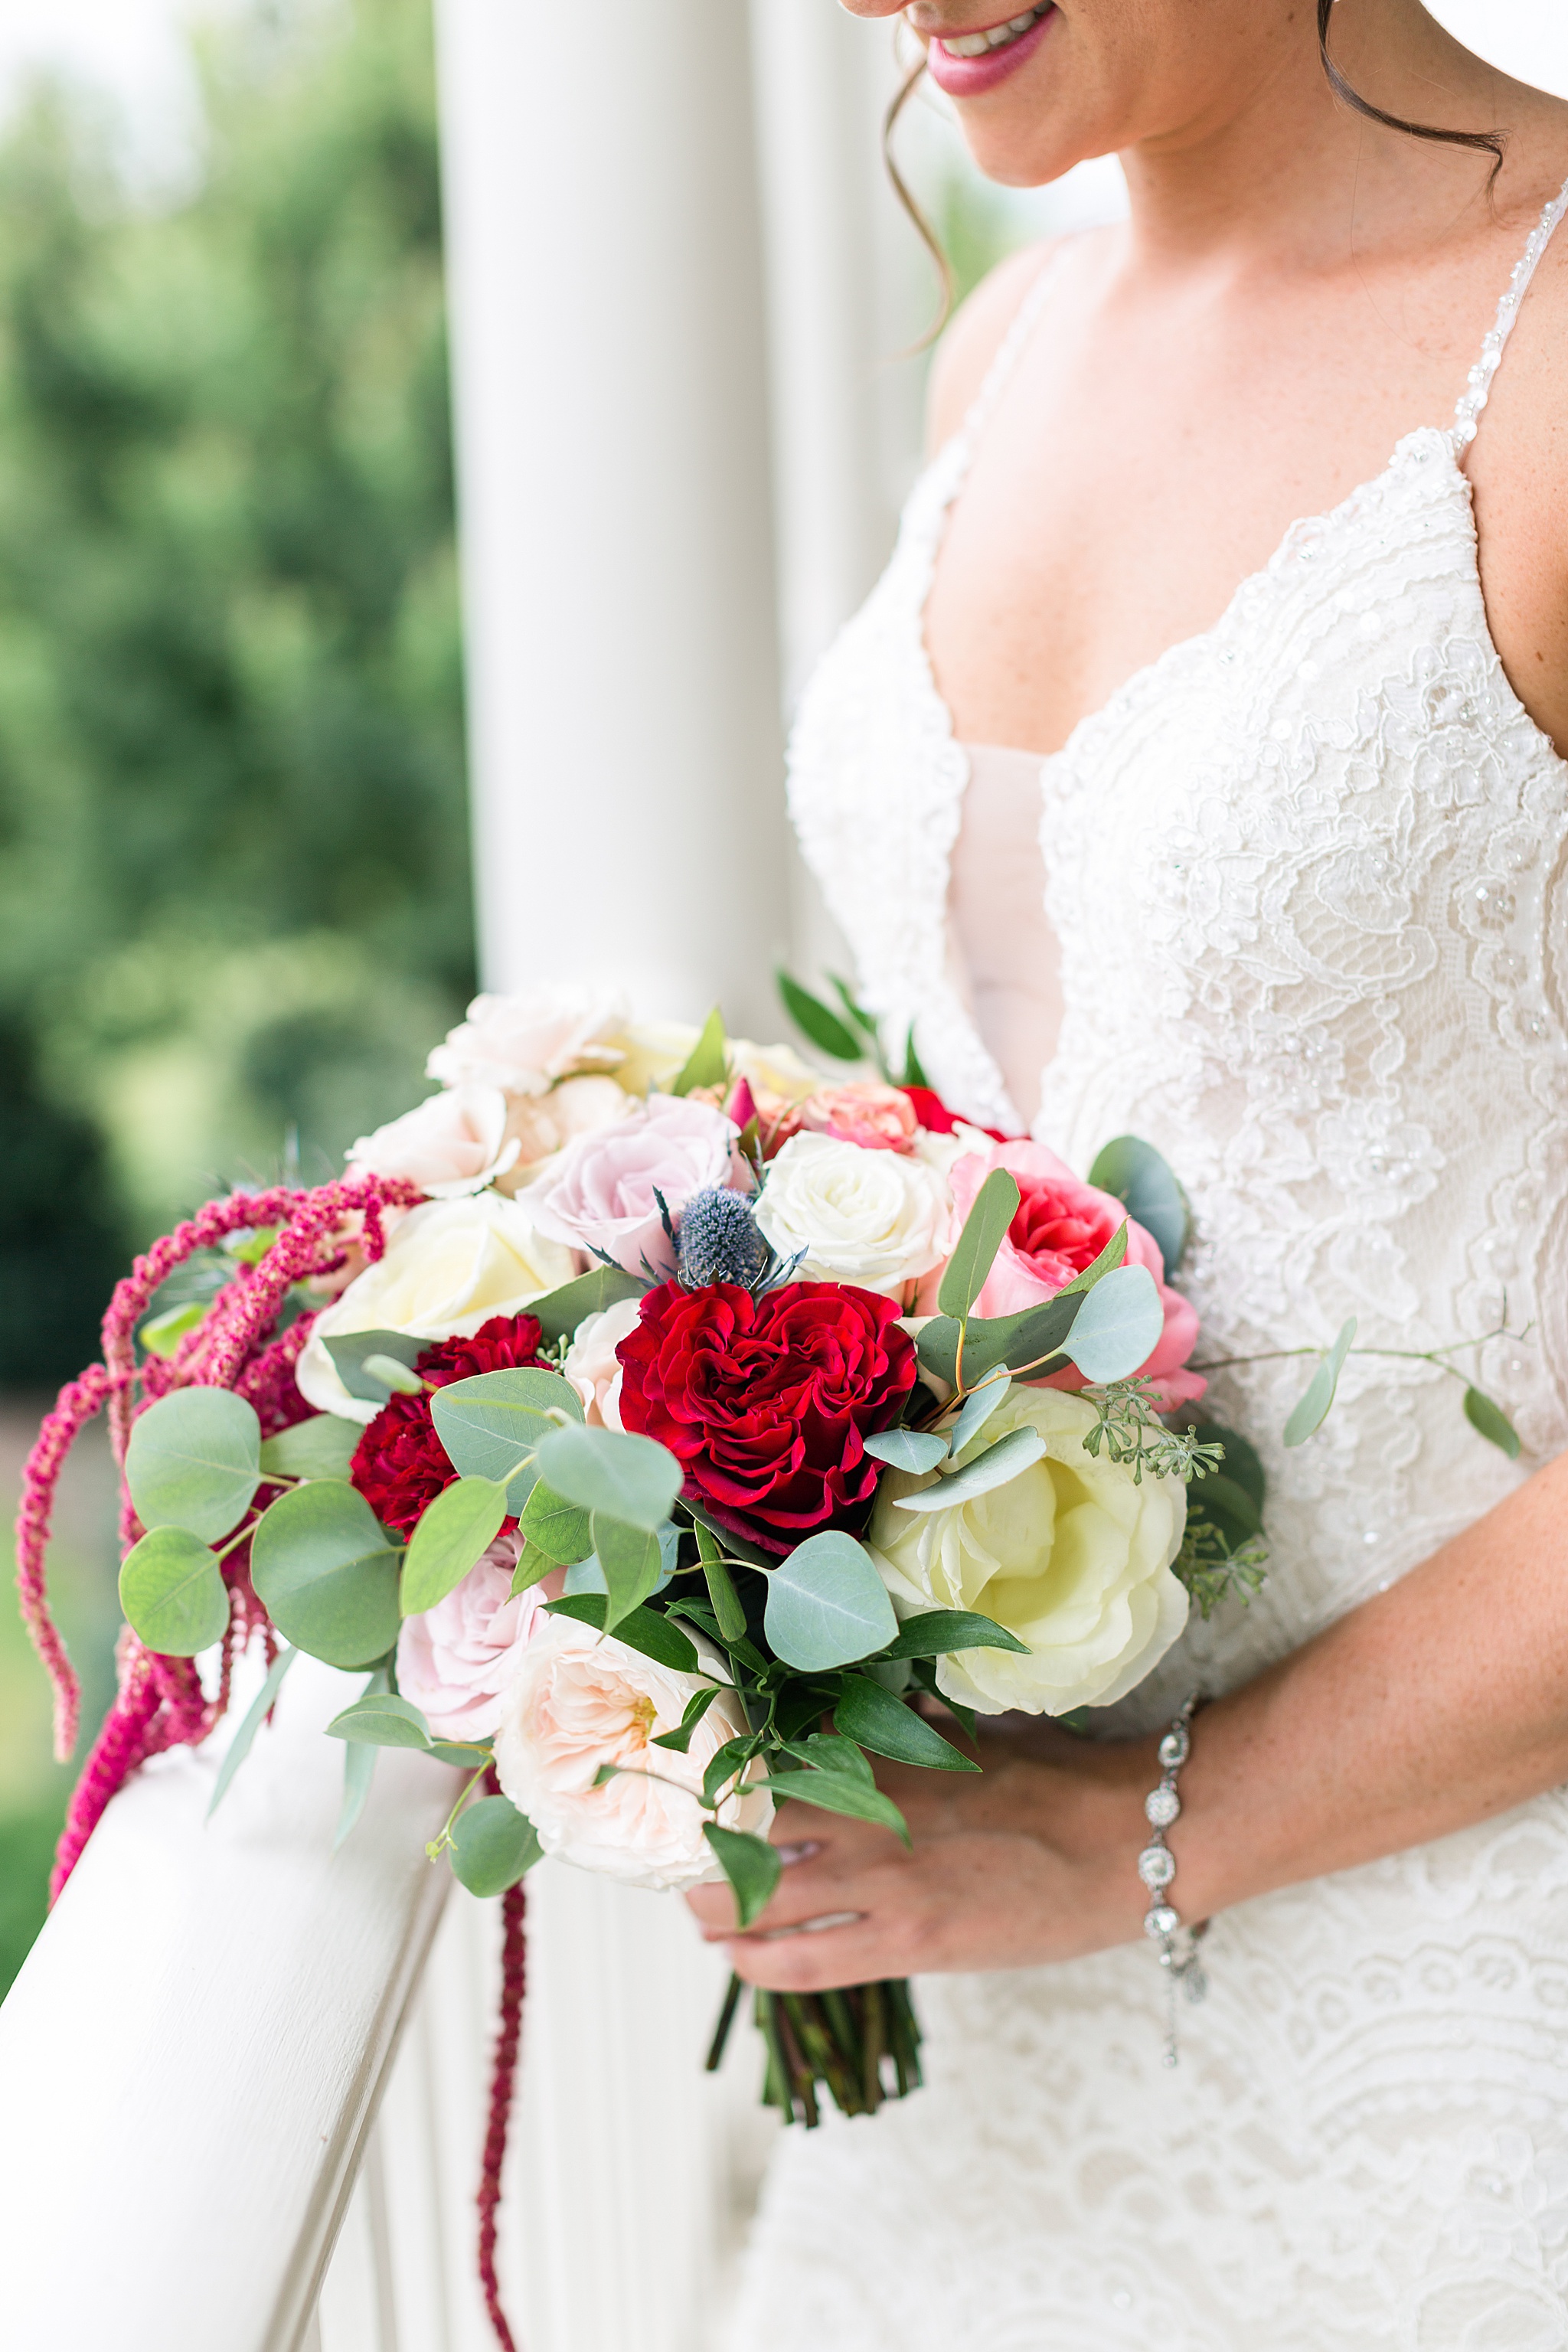 wedding bouquet with fall inspiration photographed by Alexandra Mandato Photography